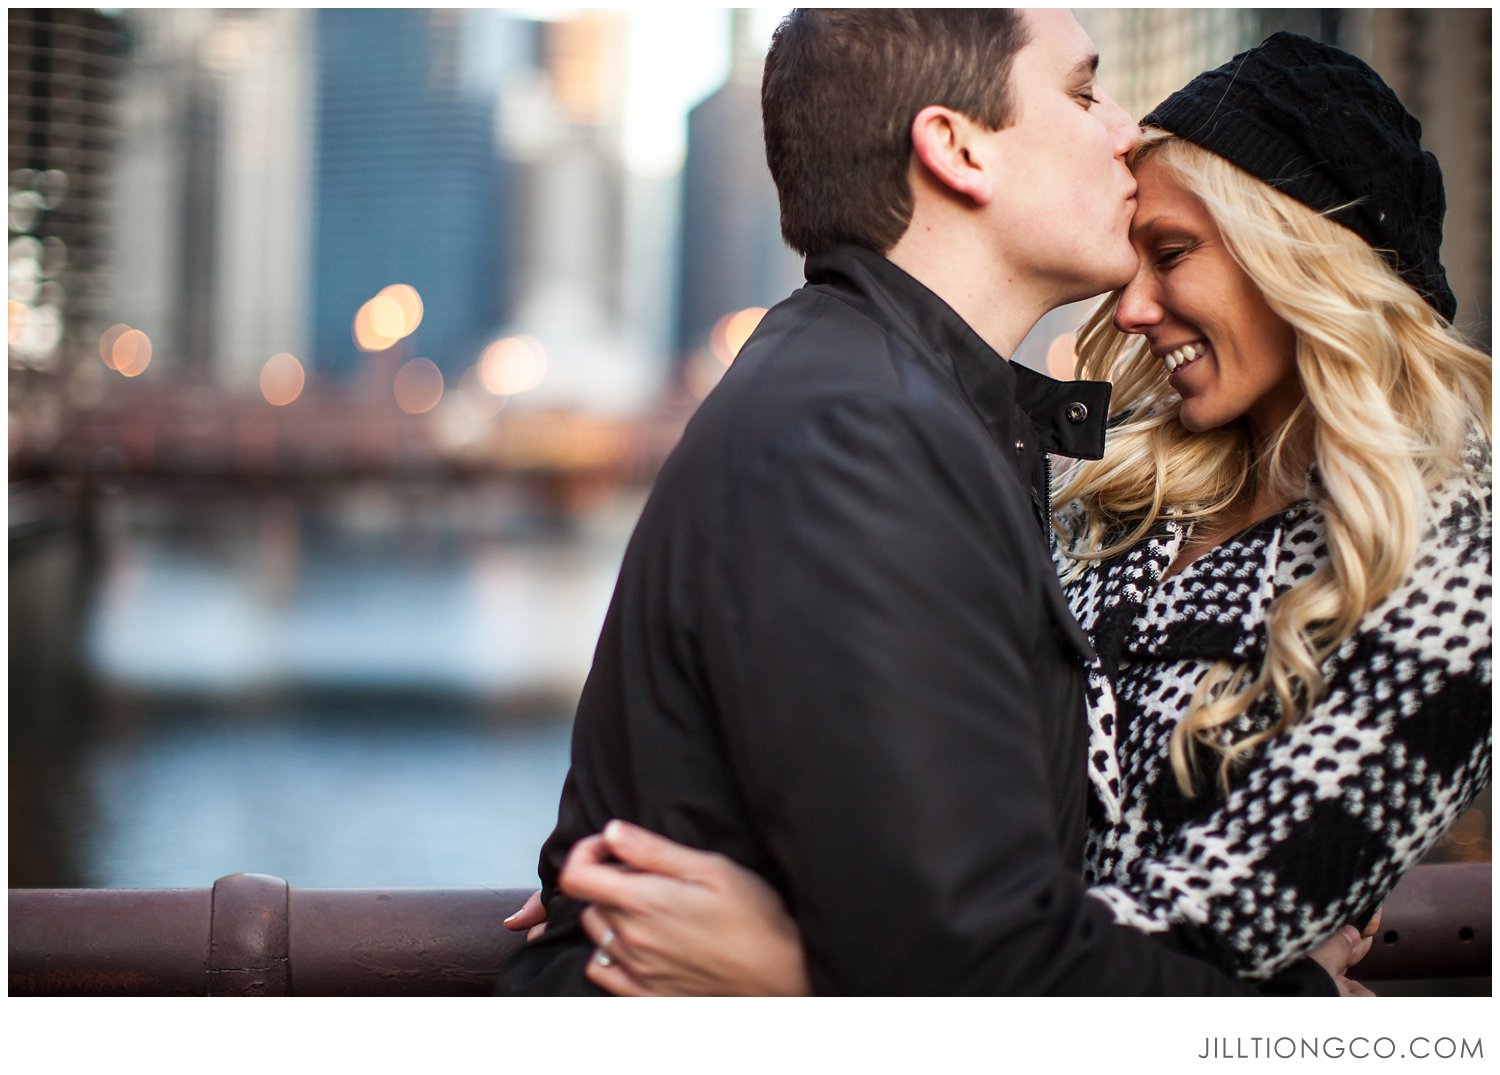 Chicago Engagement Photographer | Jill Tiongco Photography